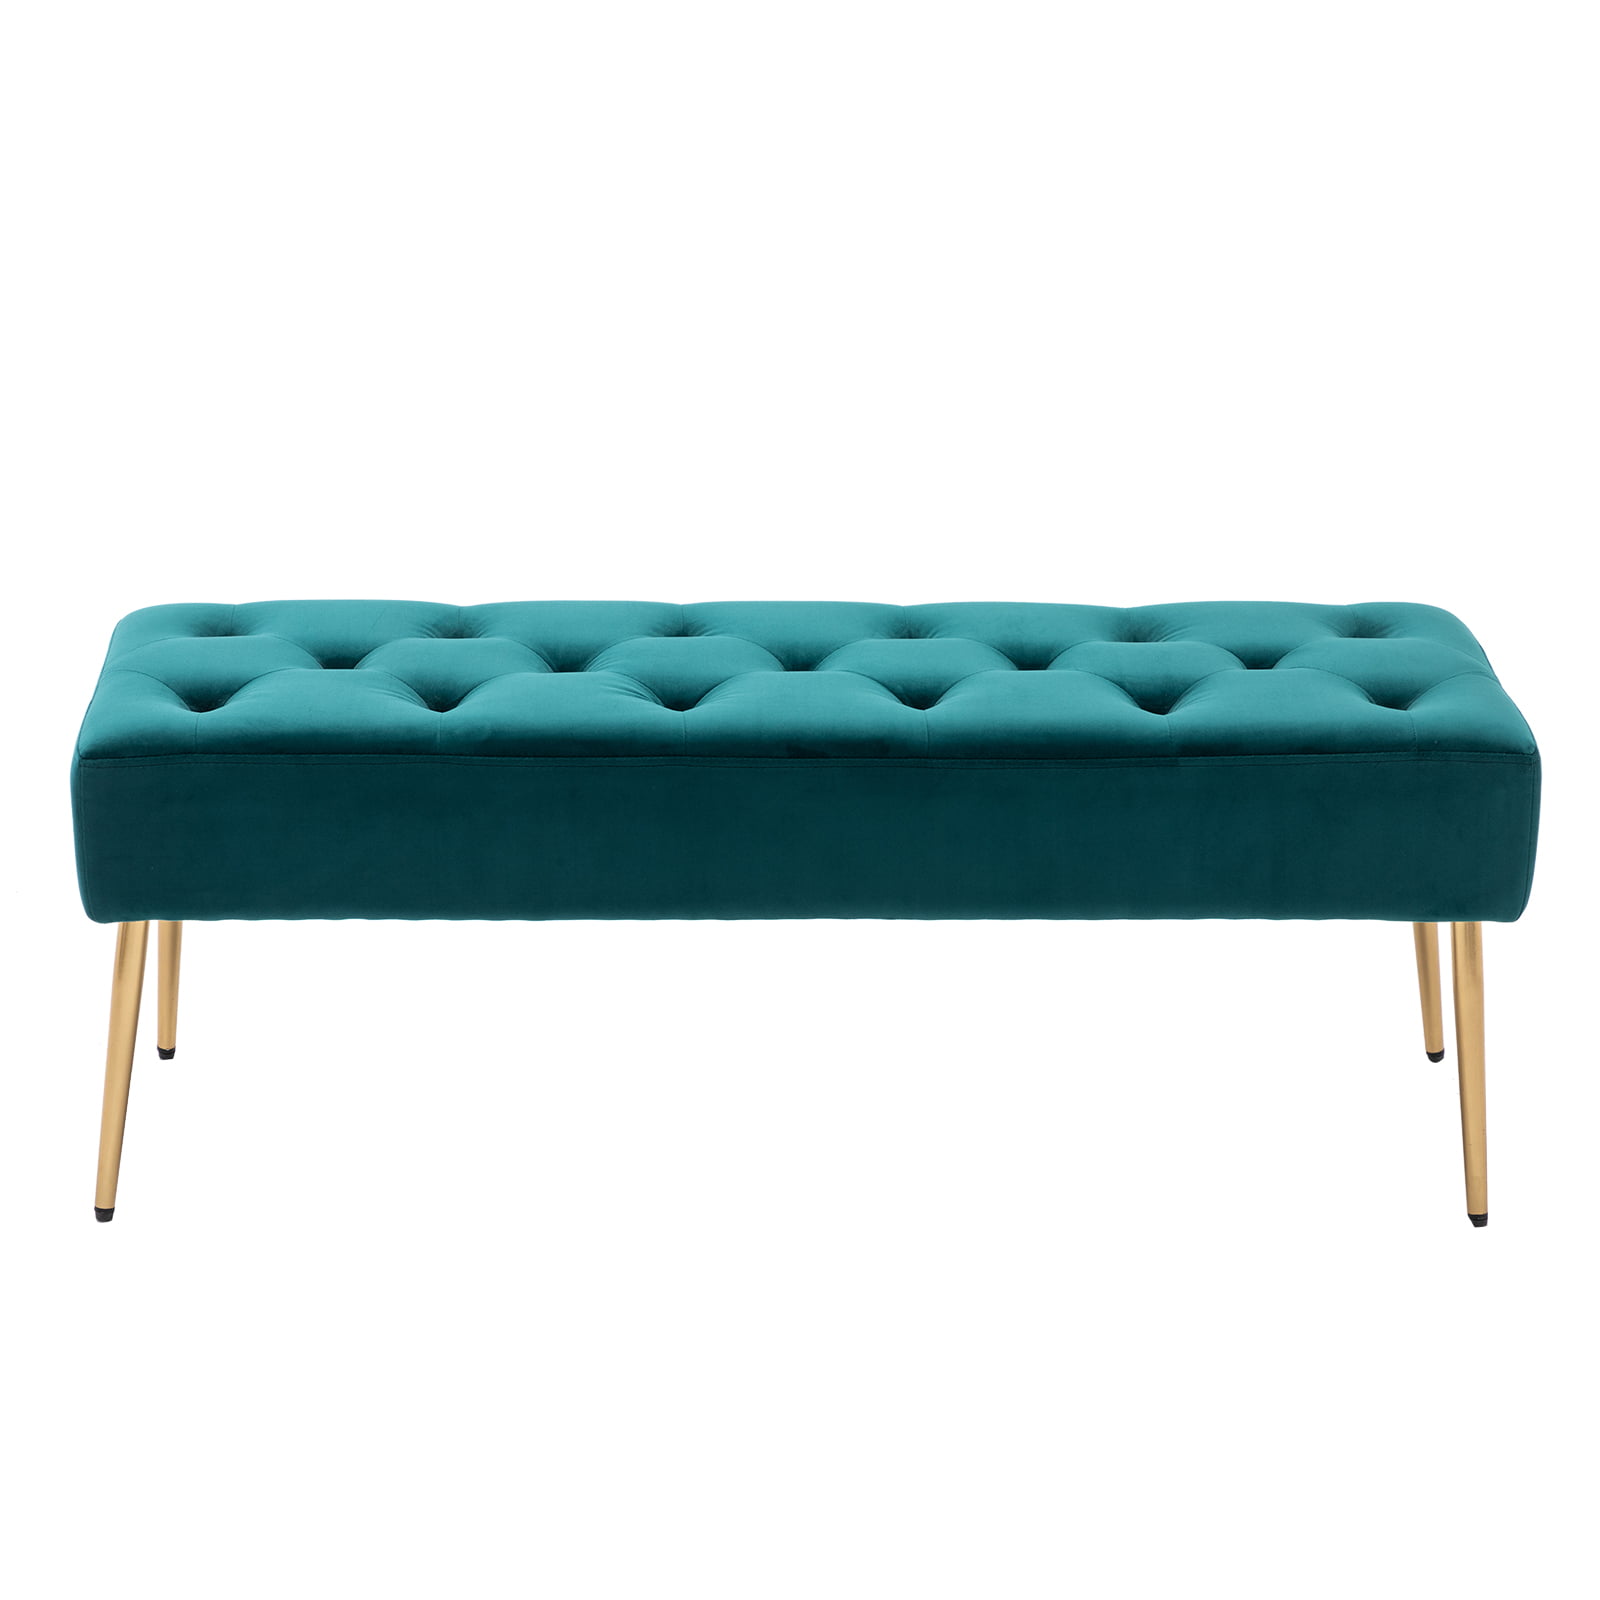 Tan Modern Fabric Storage Bench with Arms Button Tufted Footstool Ottoman Bench for Living Room Bedroom 